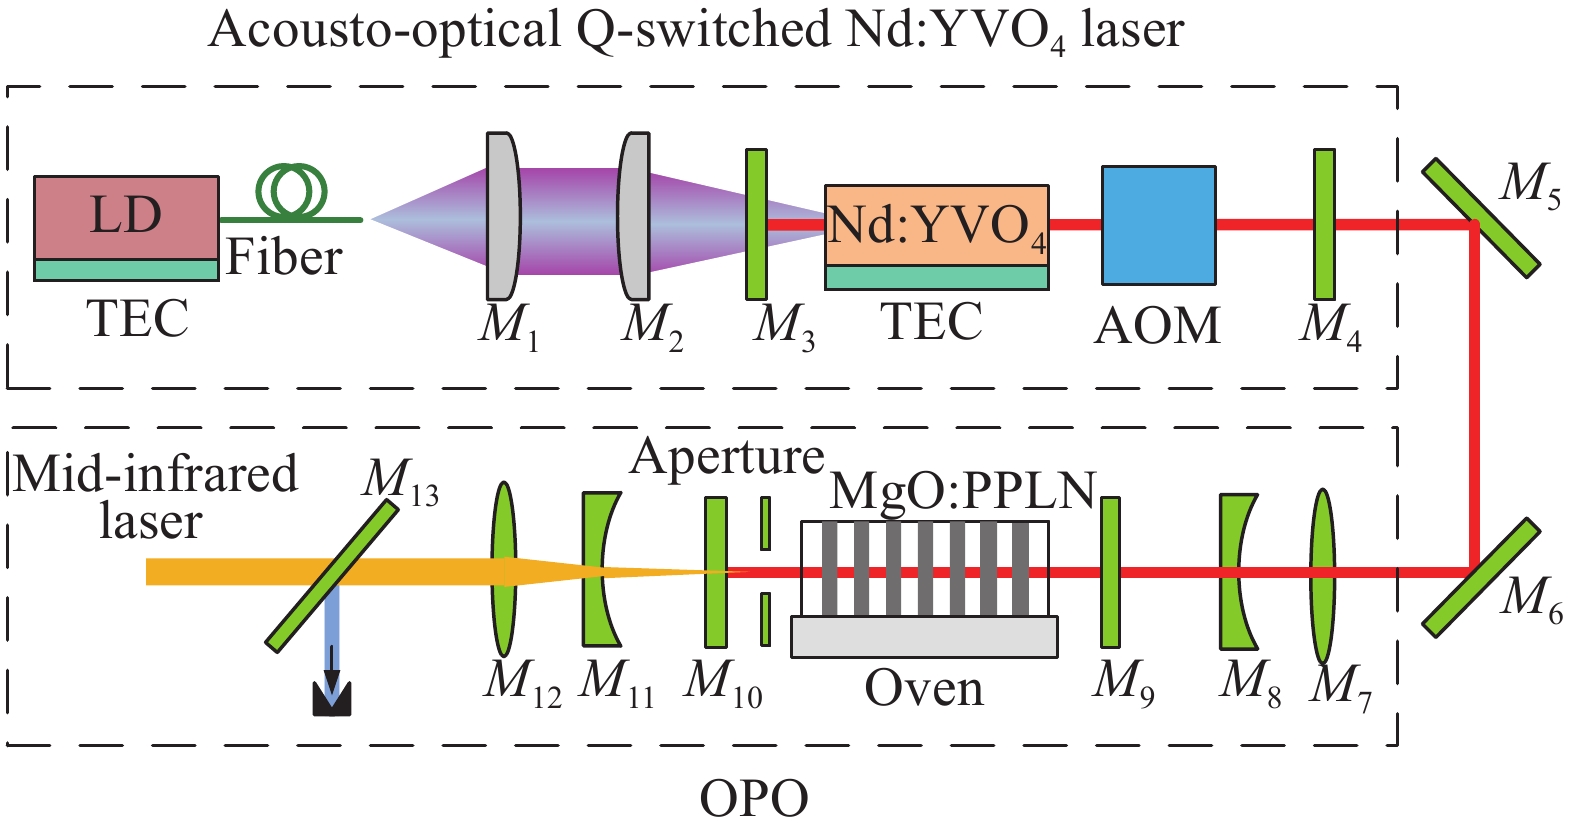 Experimental setup of OPO pumped by Nd:YVO4 laser